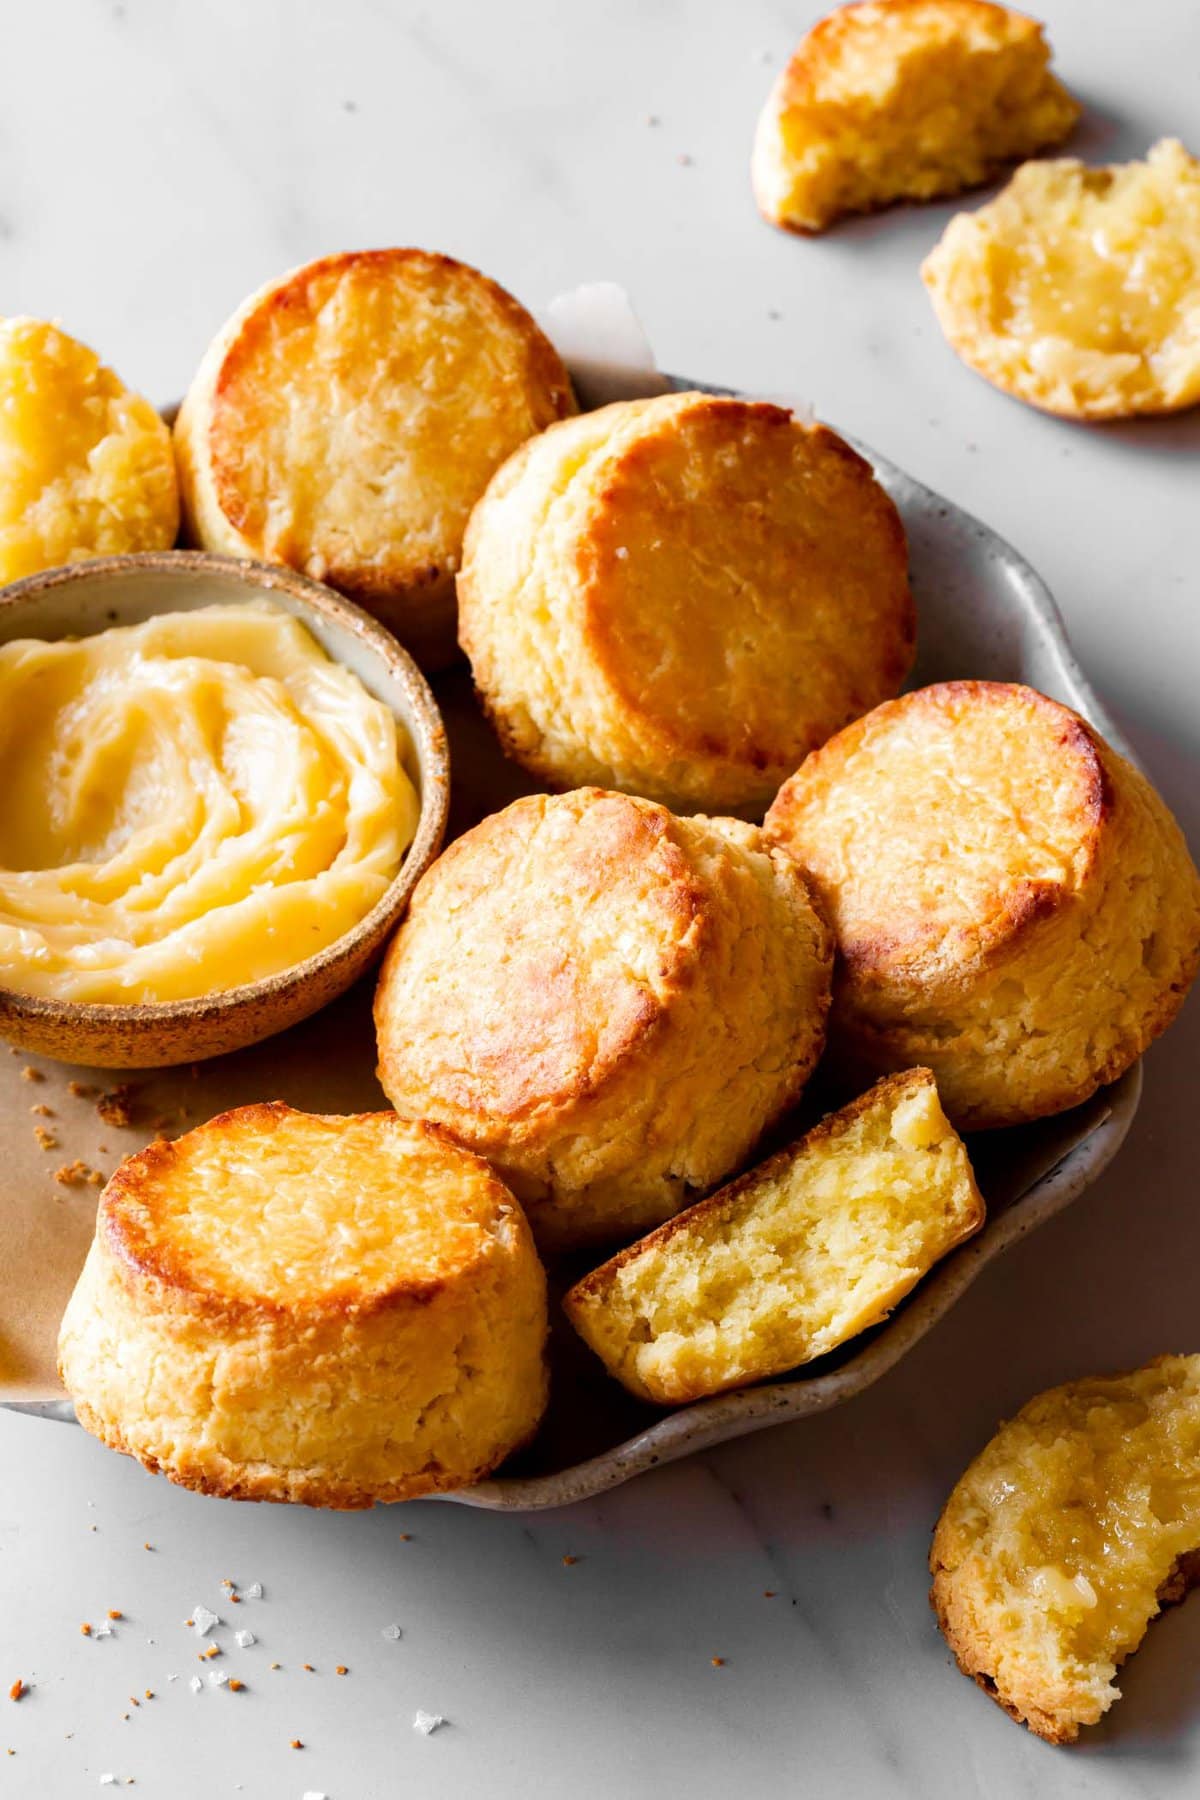 biscuits are arranged in a serving bowl looking beautiful